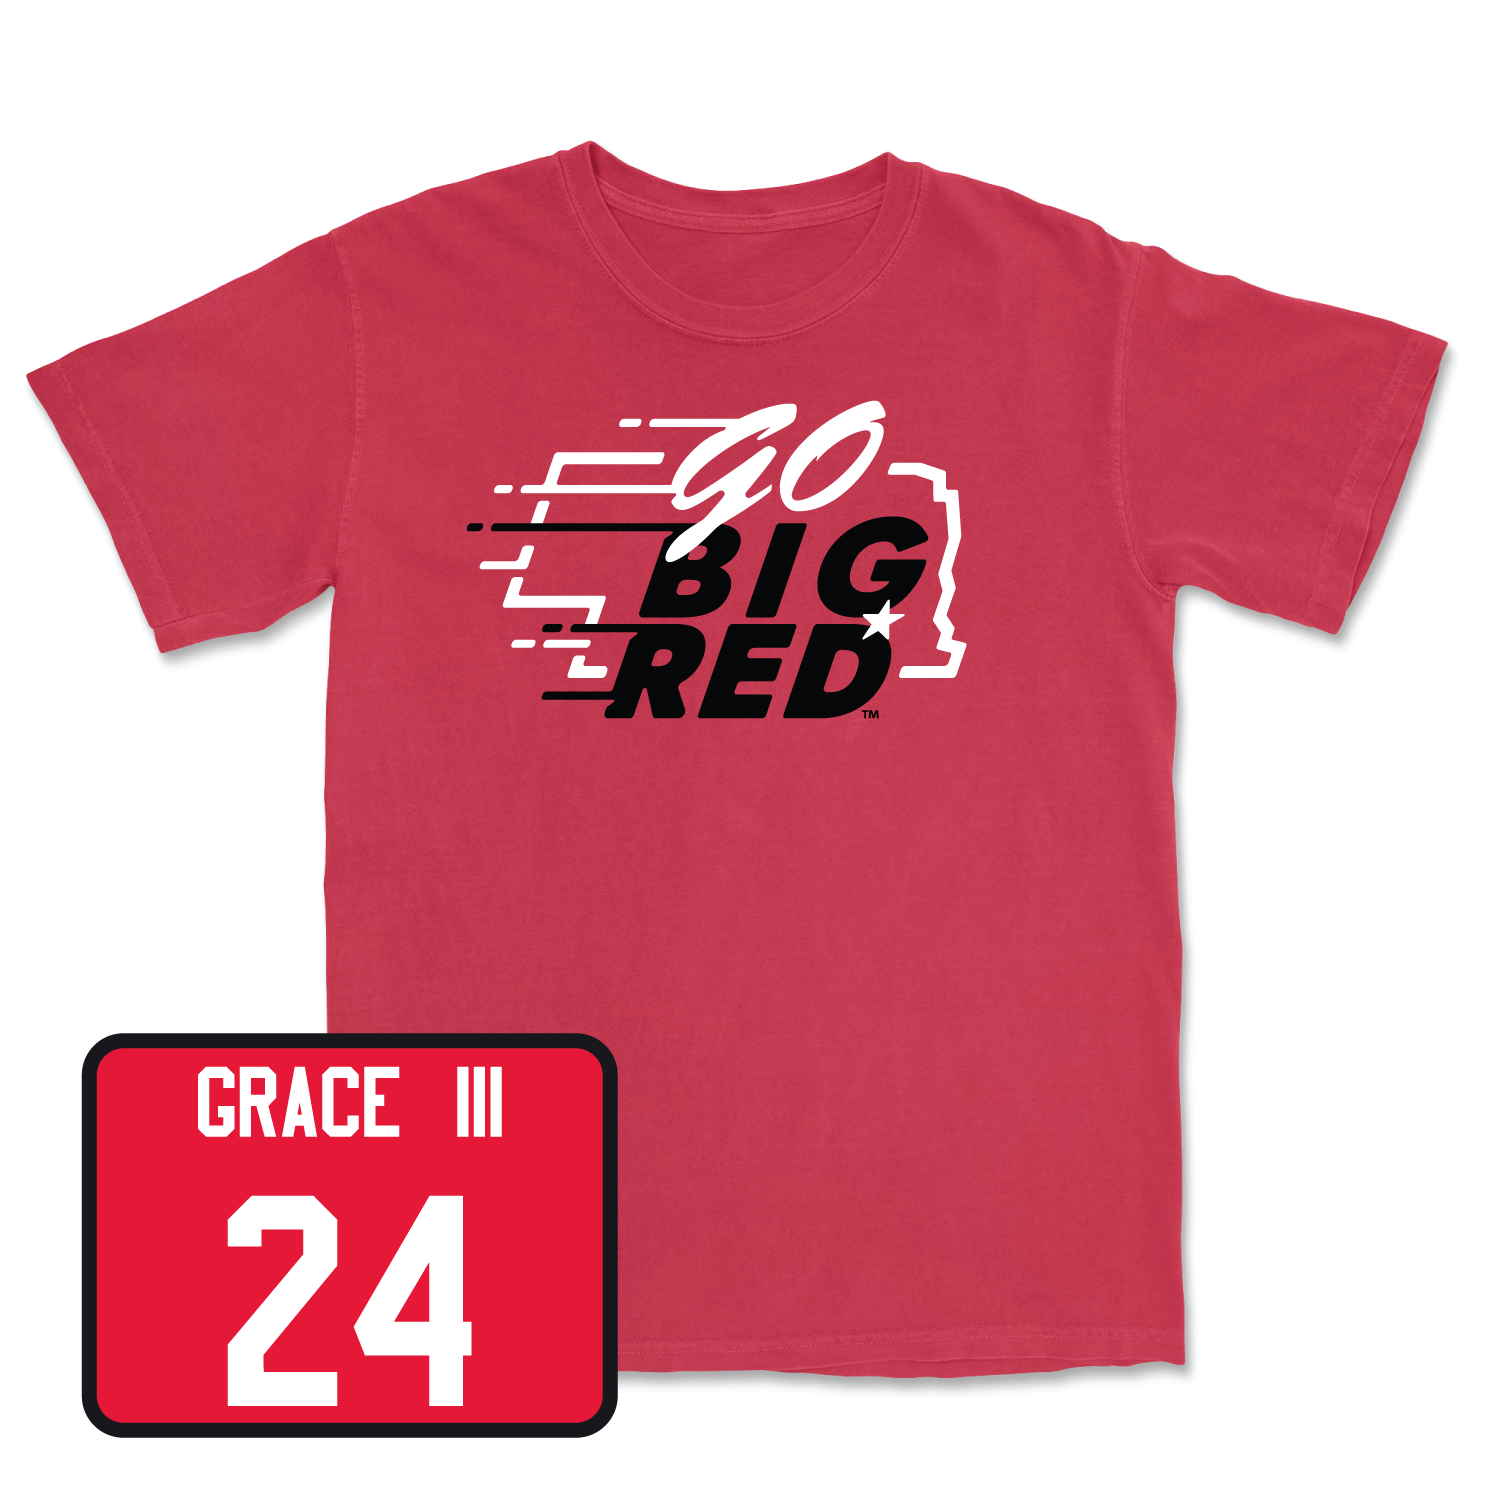 Red Men's Basketball GBR Tee Youth Large / Jeffrey Grace III | #24